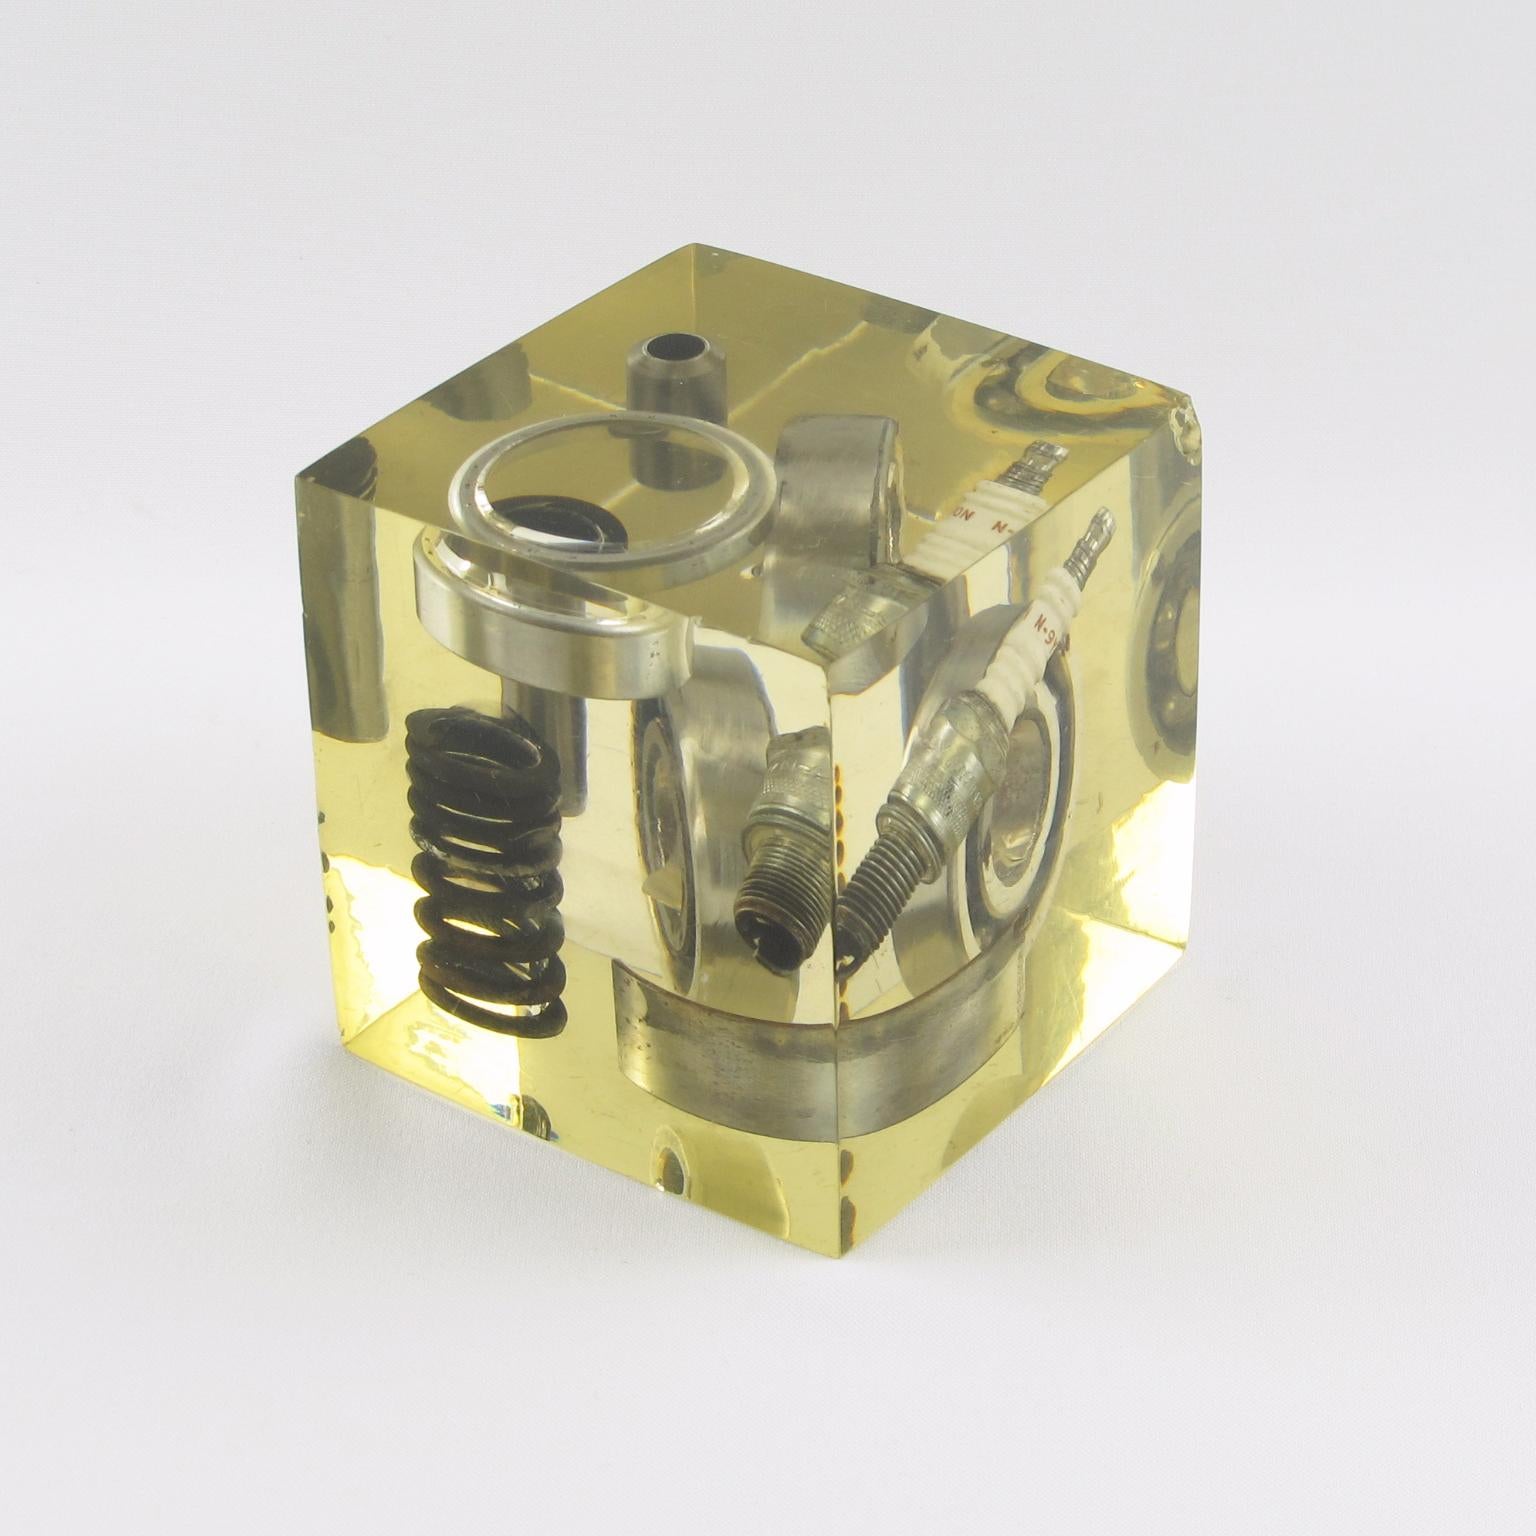 The design of this cube sculpture or resin paperweight is attributed to the French artist Pierre Giraudon. The resin cube features old industrial elements of an automobile engine. Car gears fit into layered cast resin. A natural yellowish coloring